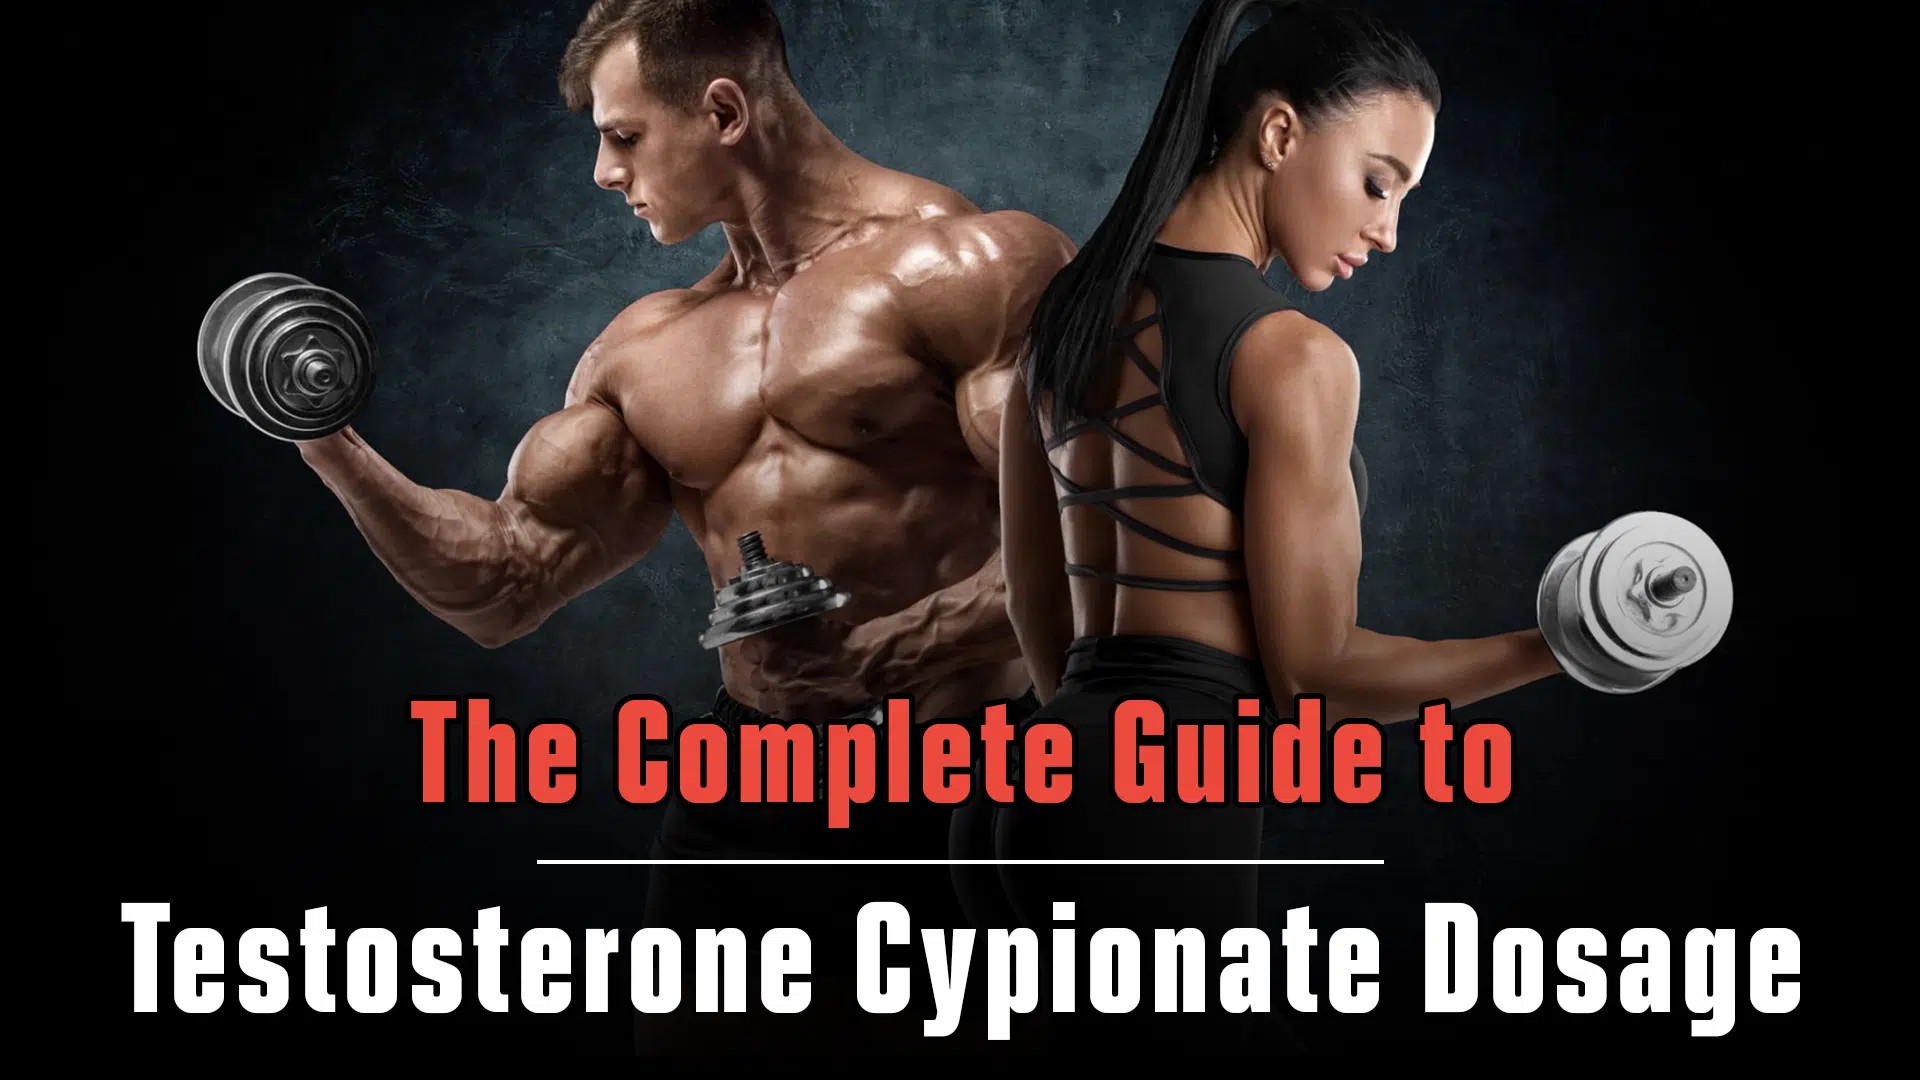 The Complete Guide to Testosterone Cypionate Dosage